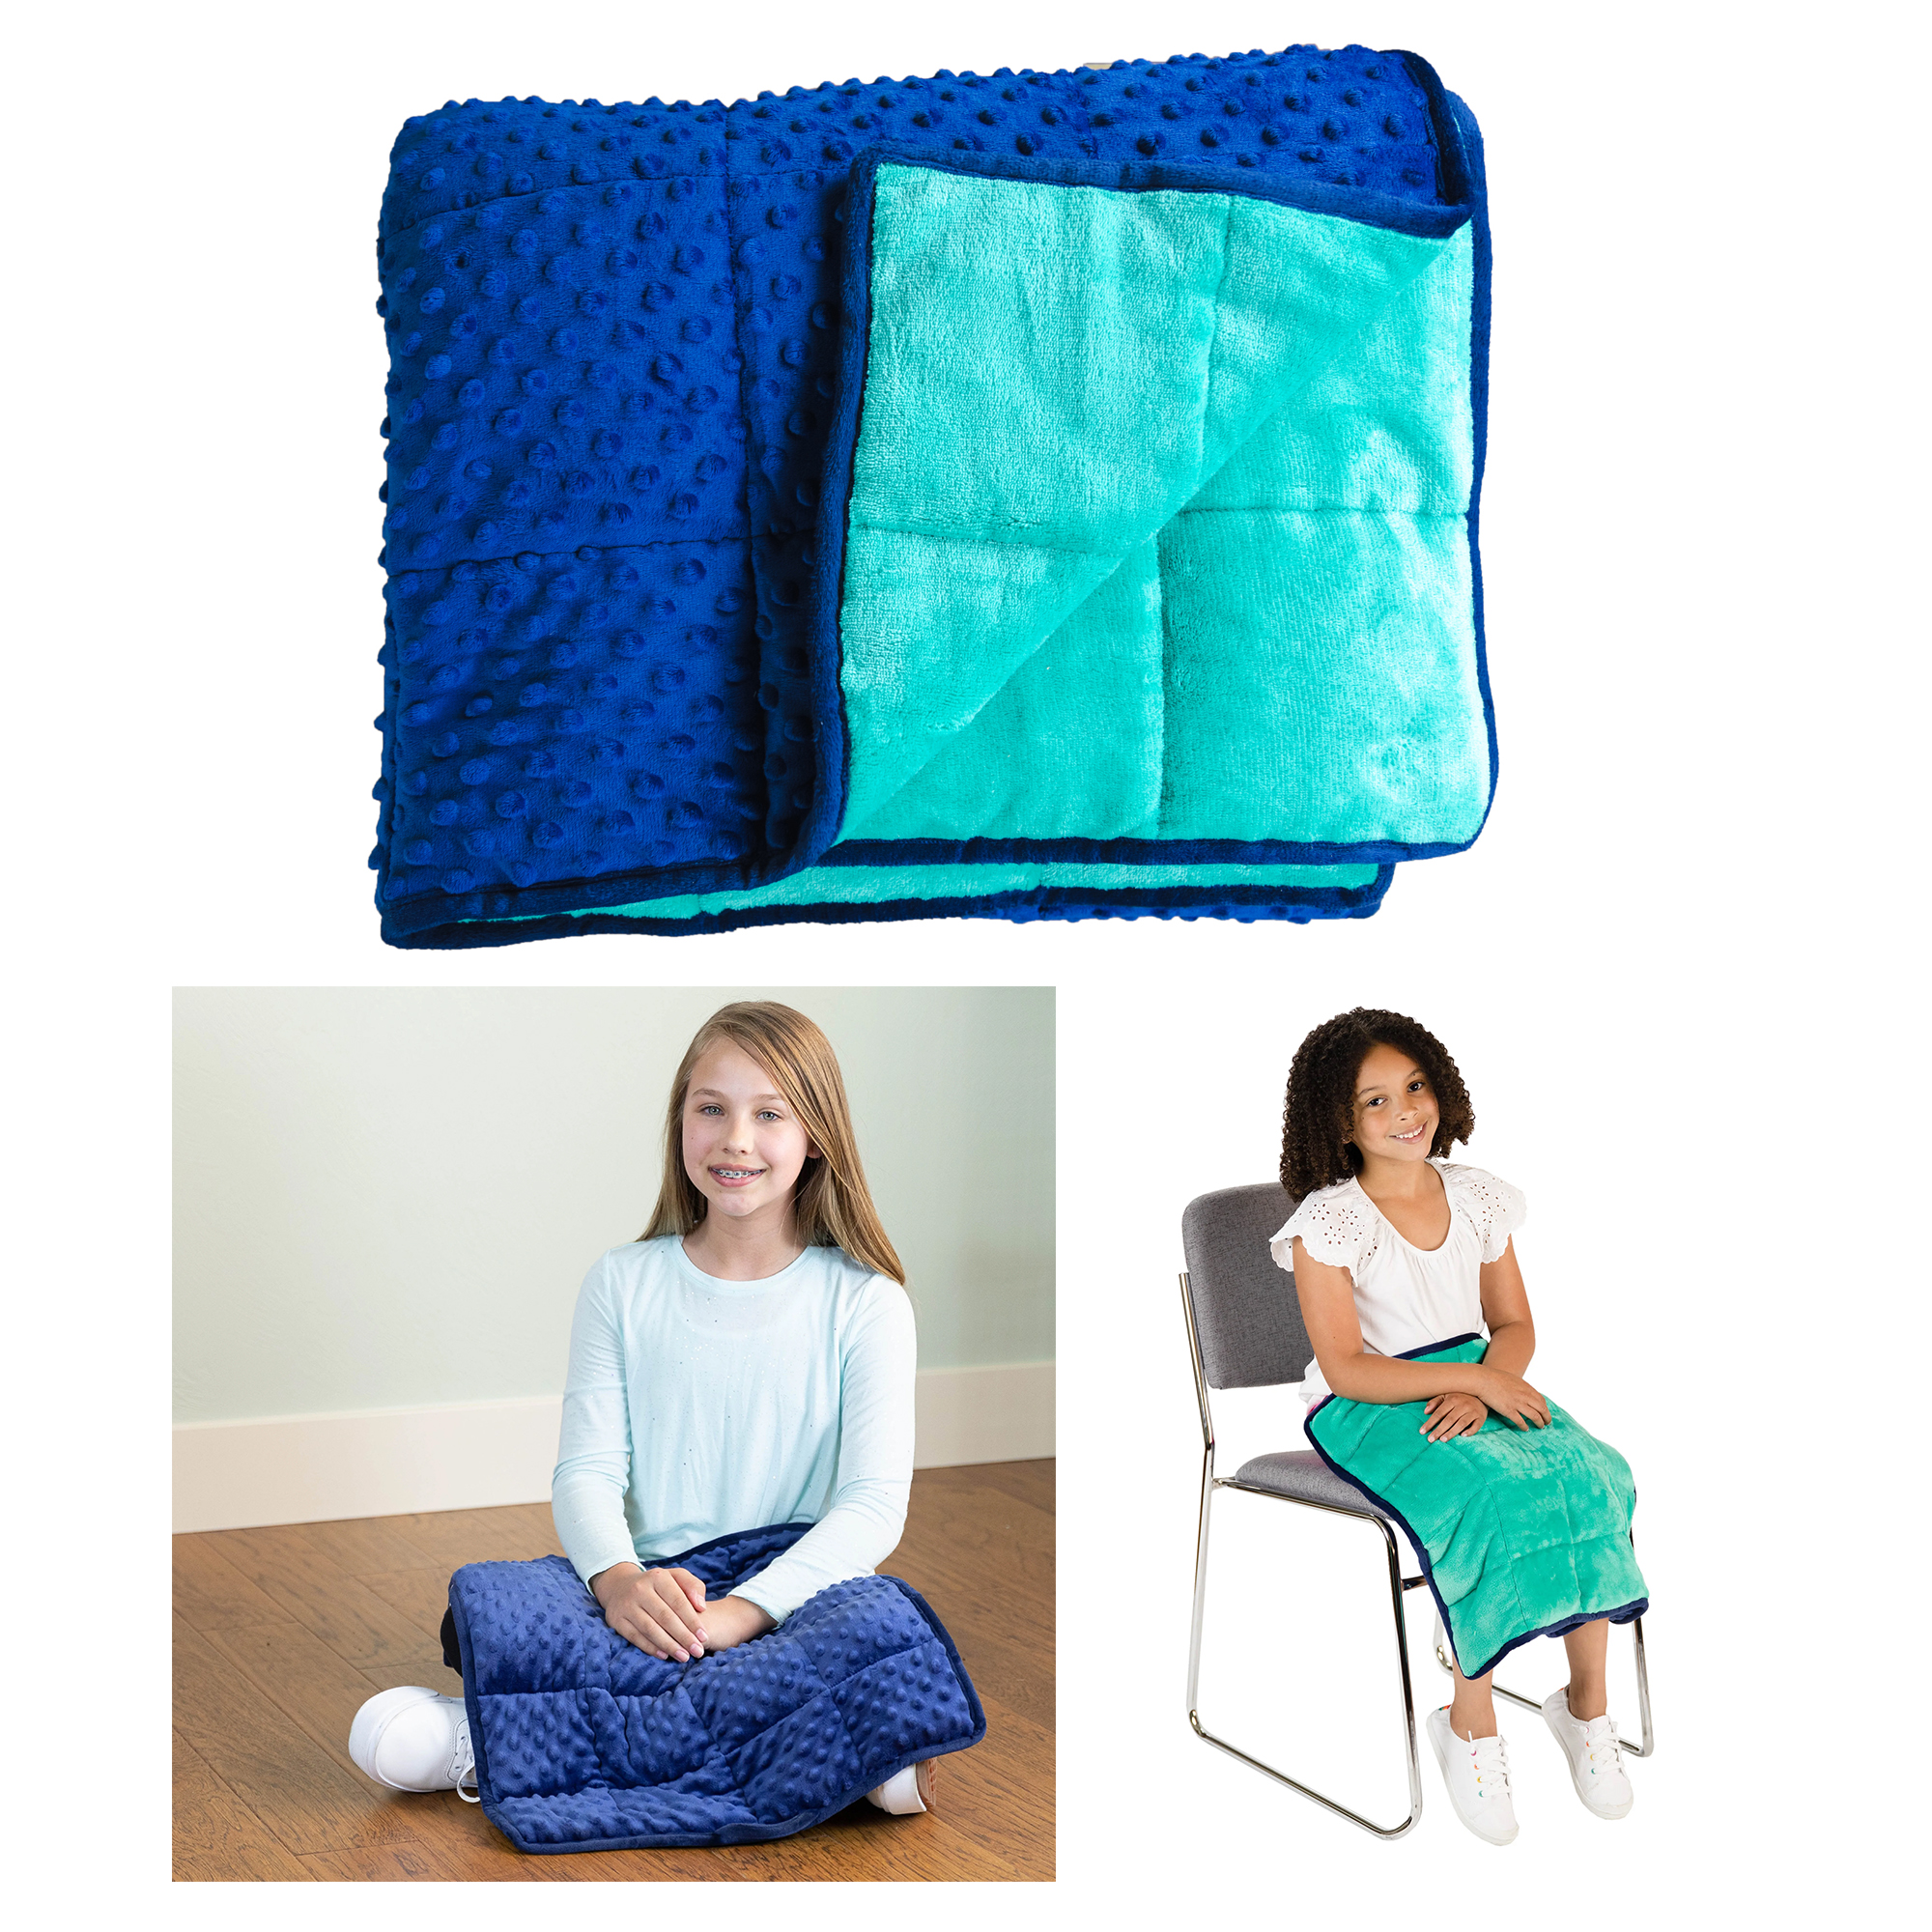 Bouncyband Soft Fleece Weighted 7lb Small Sensory Blanket for Kids, 56" x 36" image number null